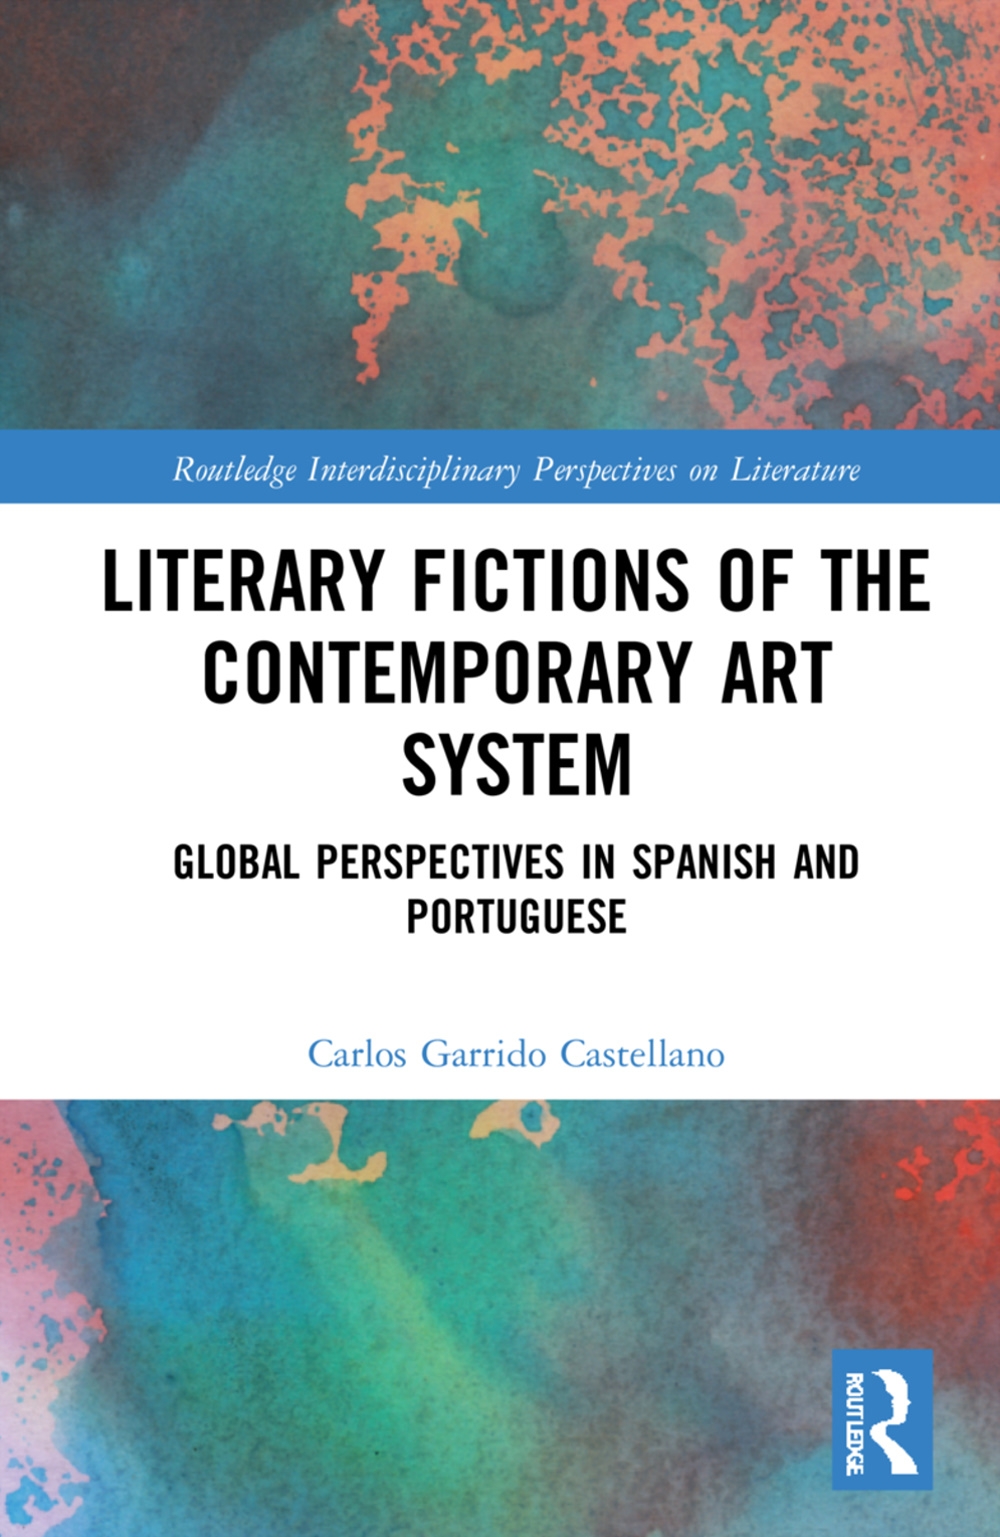 Literary Fictions of the Contemporary Art System: Global Perspectives in Spanish and Portuguese